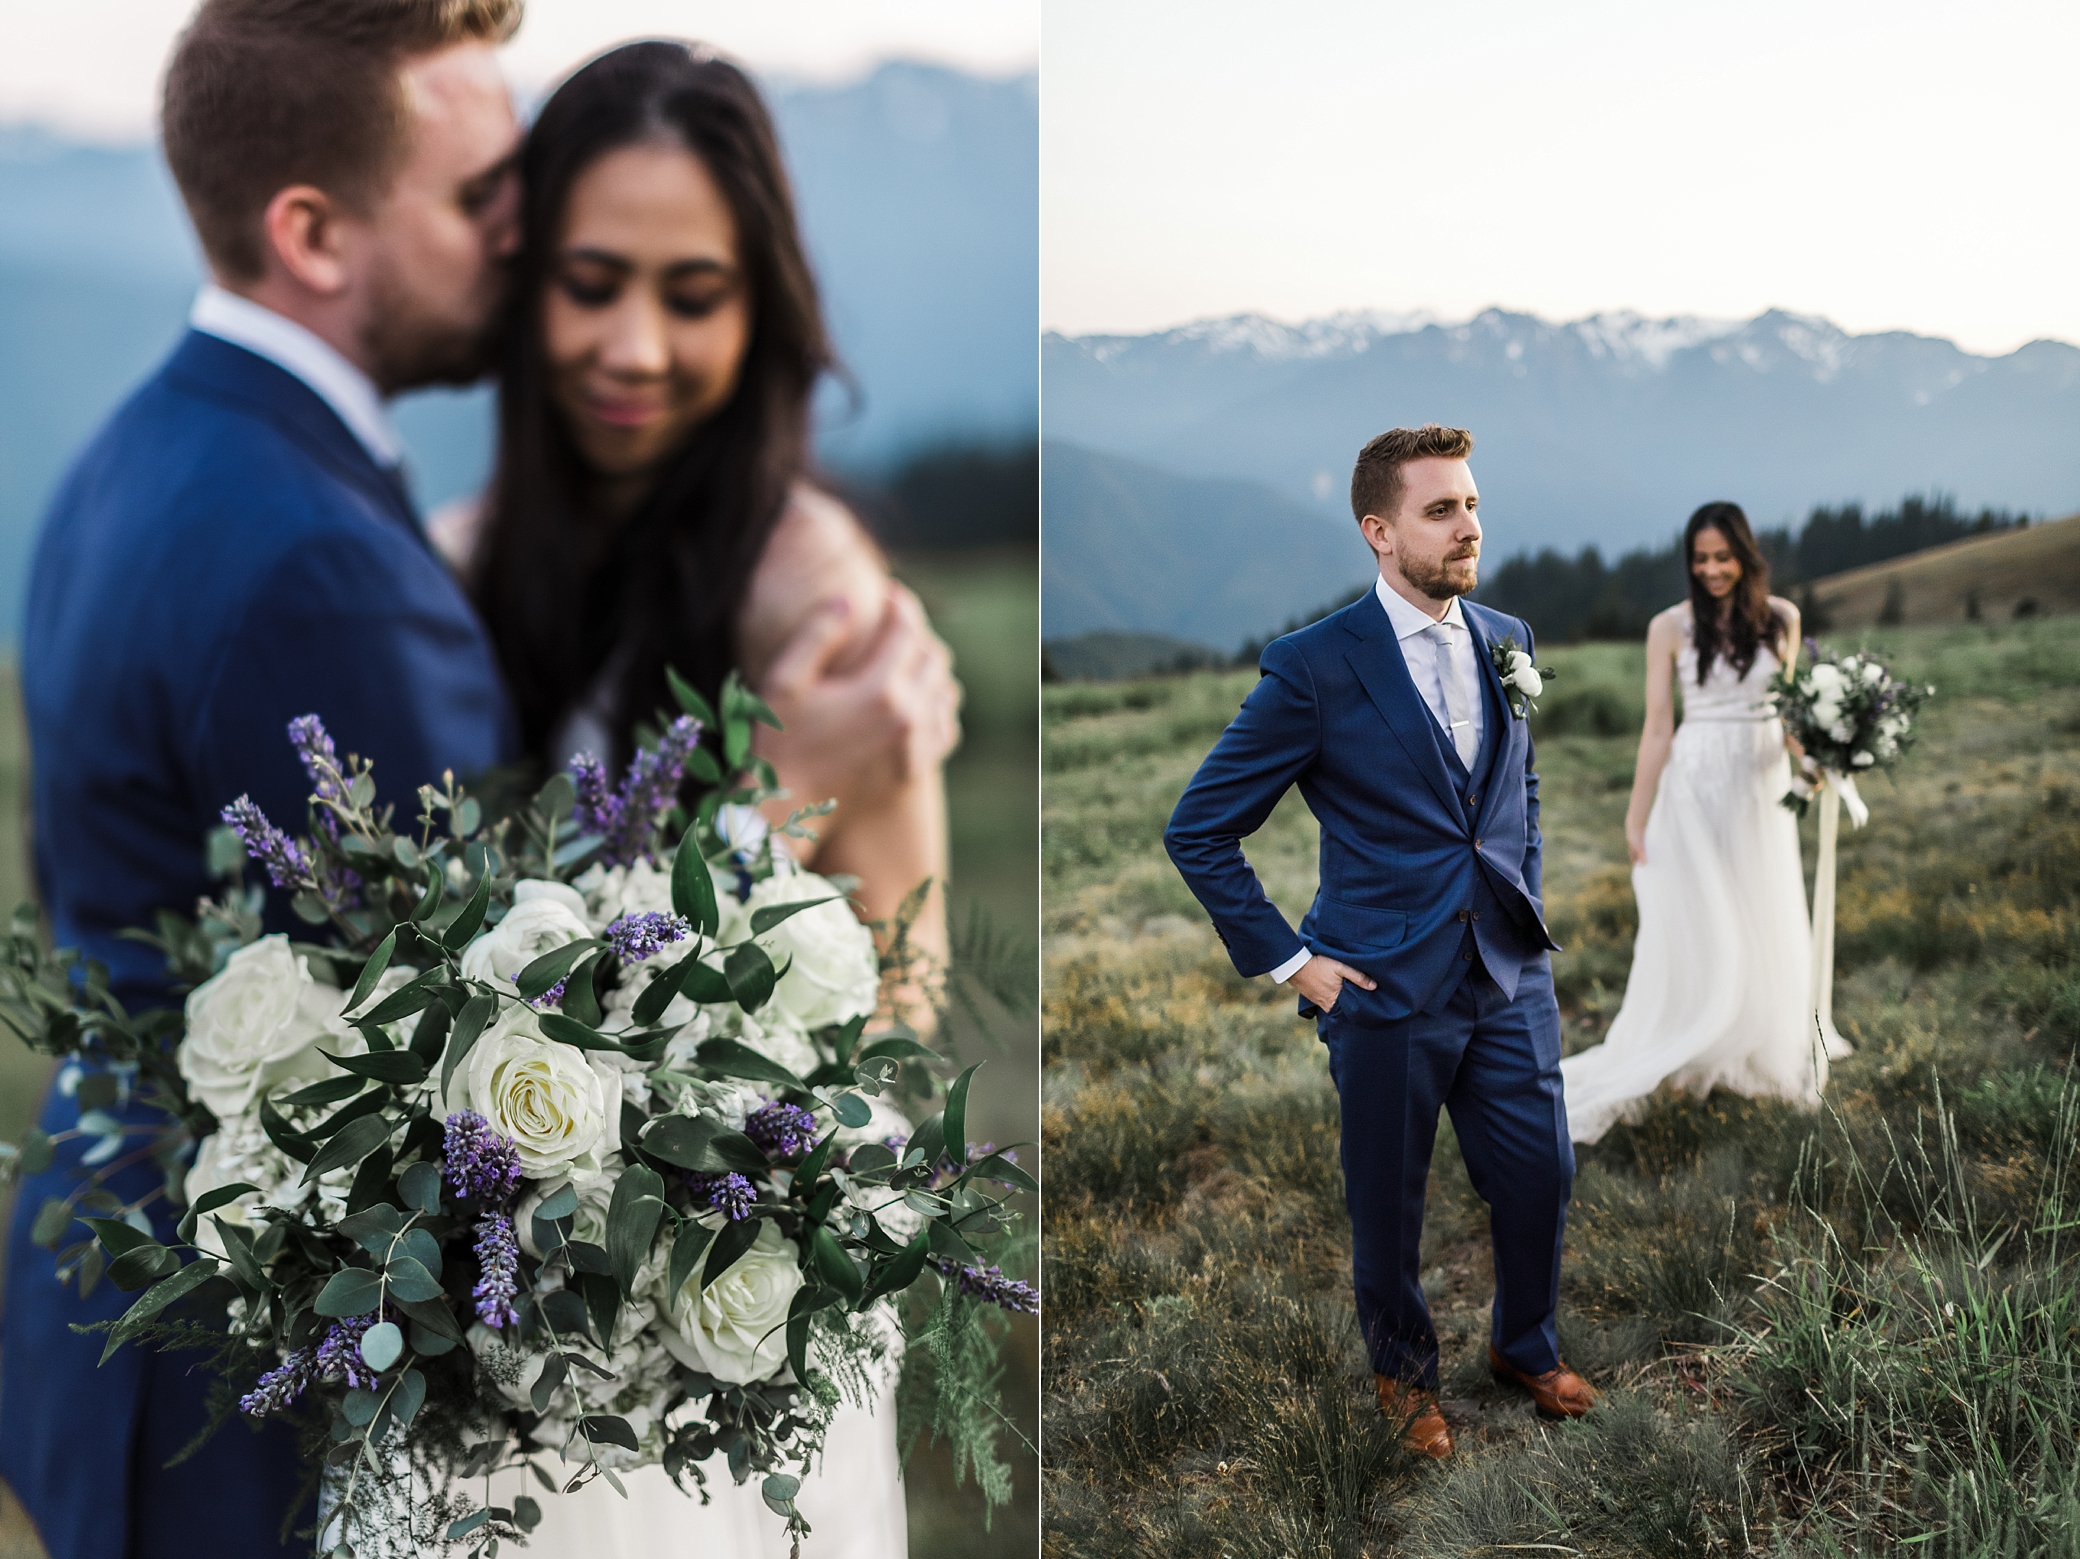 Intimate adventure elopement in mountains of the Olympic National Park. Photographed by Adventure Elopement Photographer, Megan Montalvo Photography.